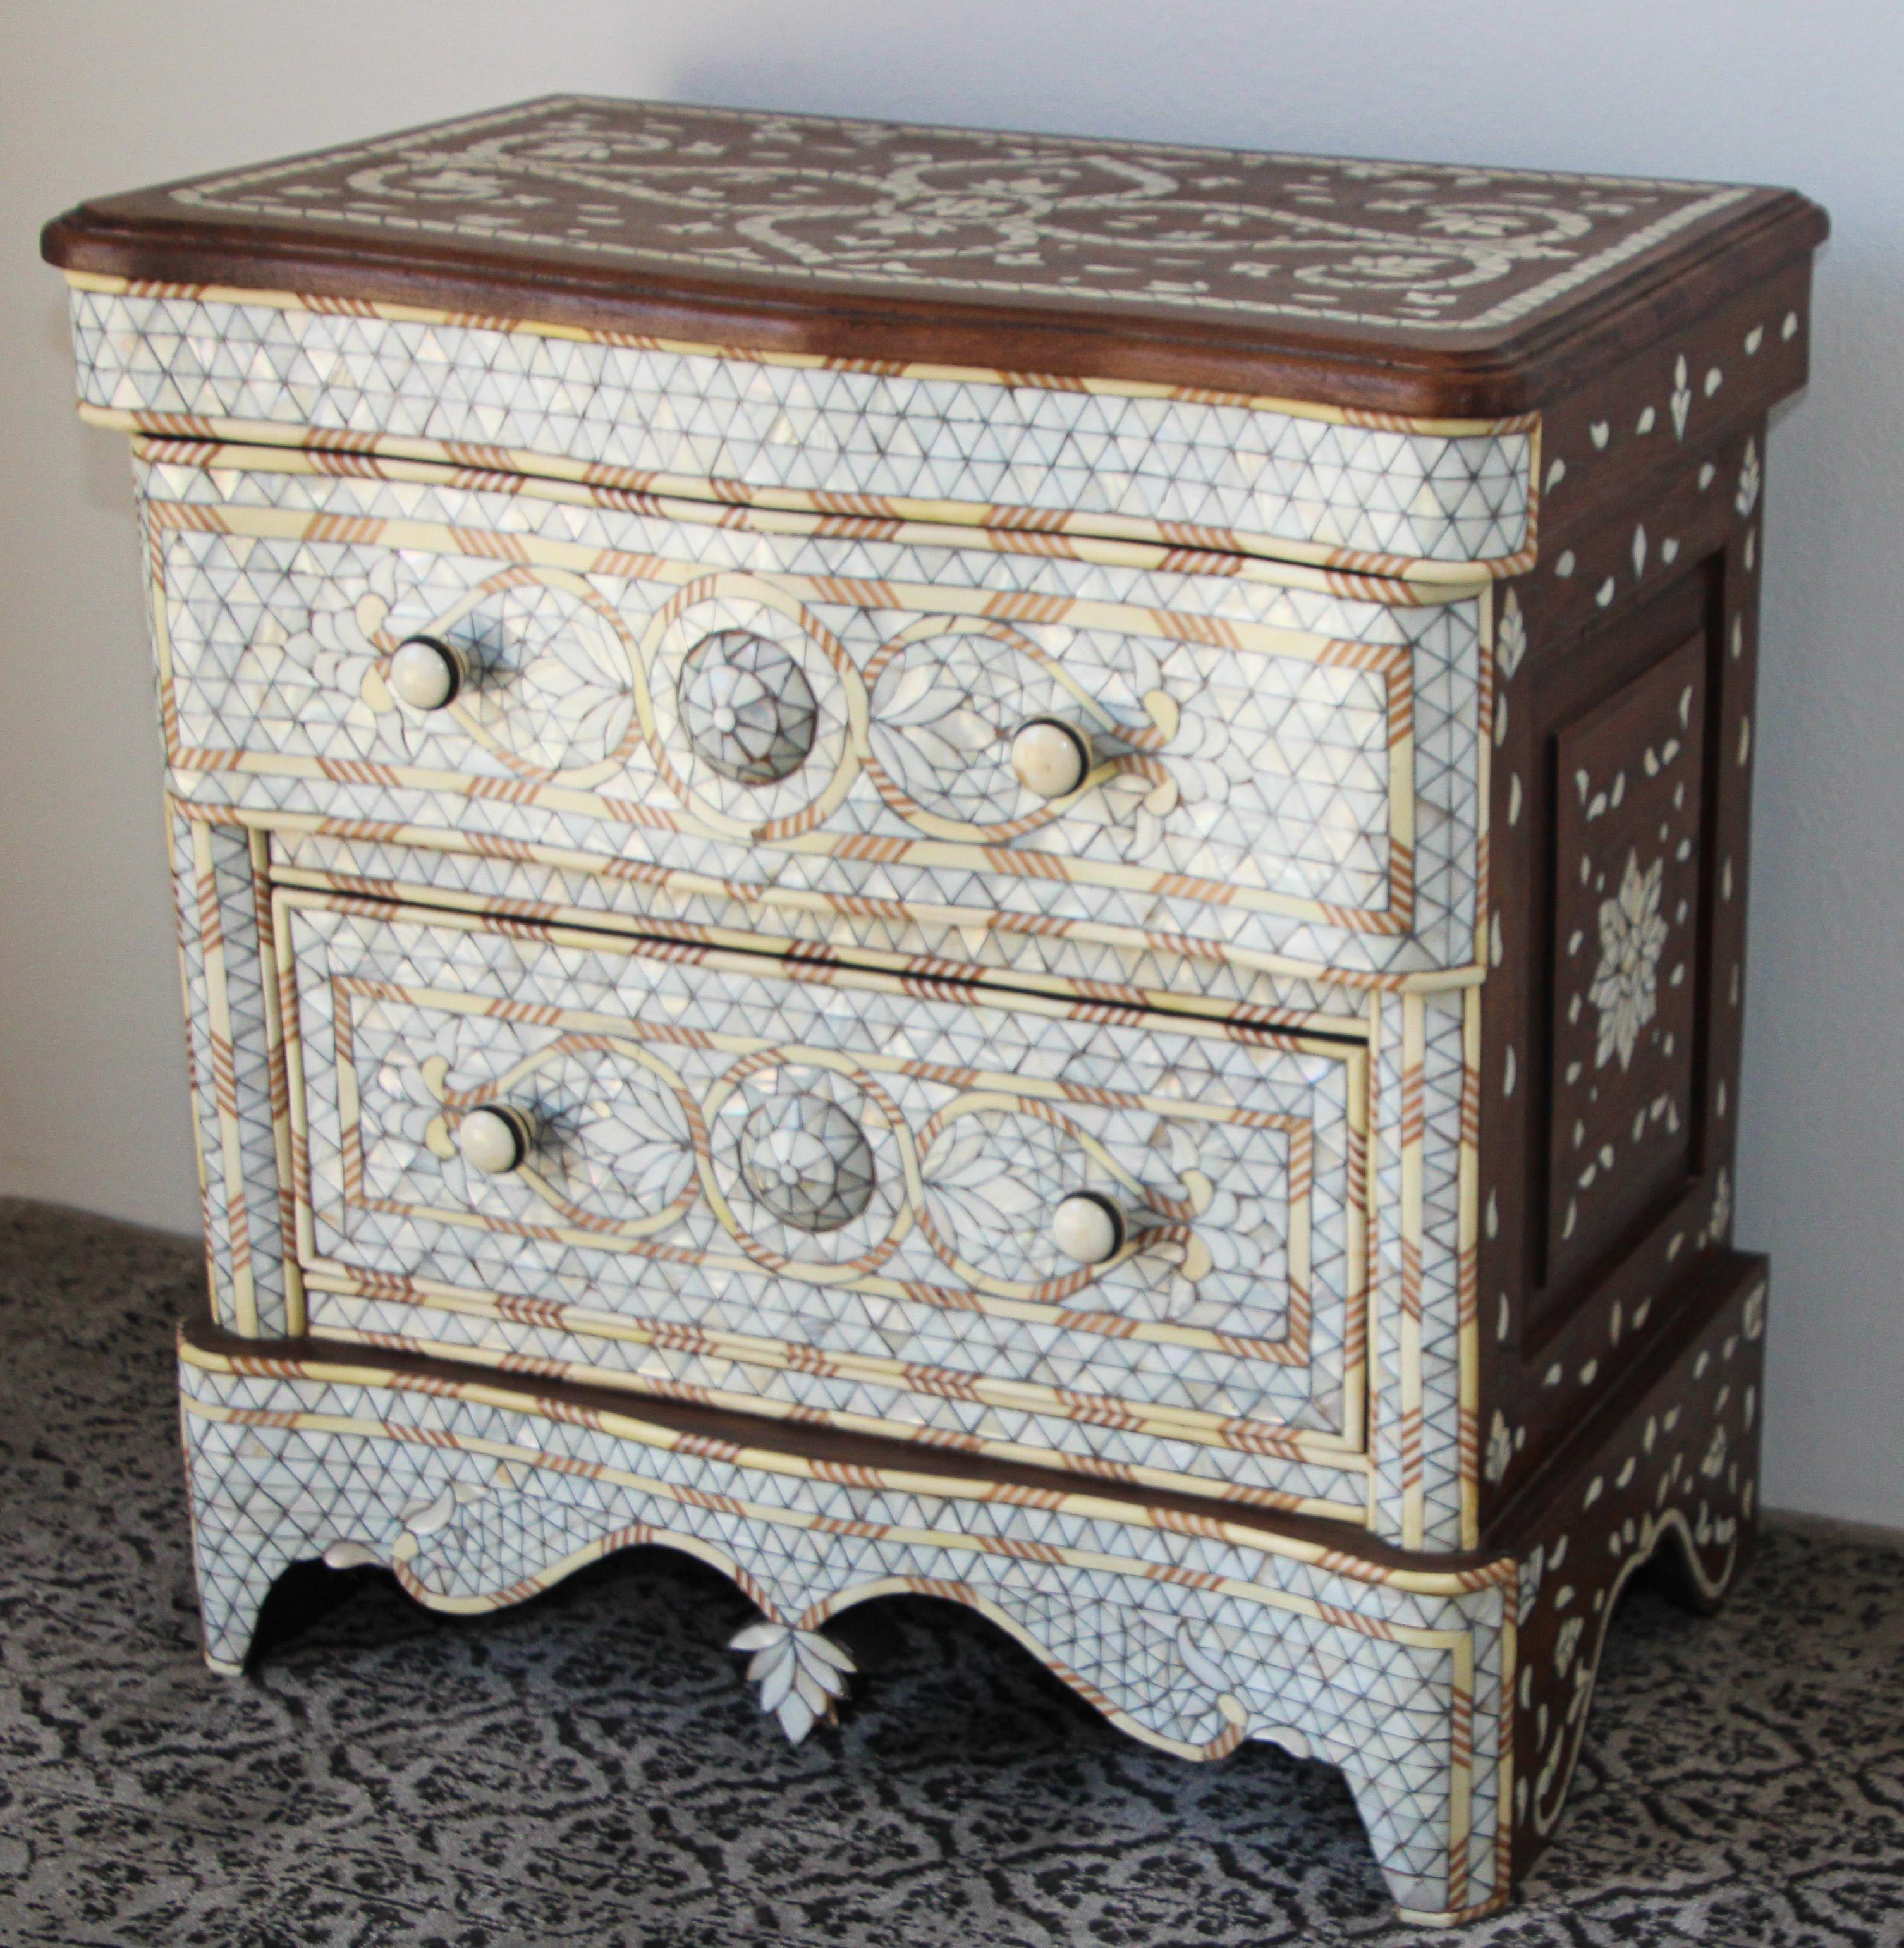 Fabulous Middle Eastern Syrian style Moroccan nightstand.
Handcrafted contemporary Moroccan dresser with two drawers, wood inlay with white mother of pearl.
Moorish arches and intricate Islamic designs.
Dowry chest of drawers heavily inlaid in